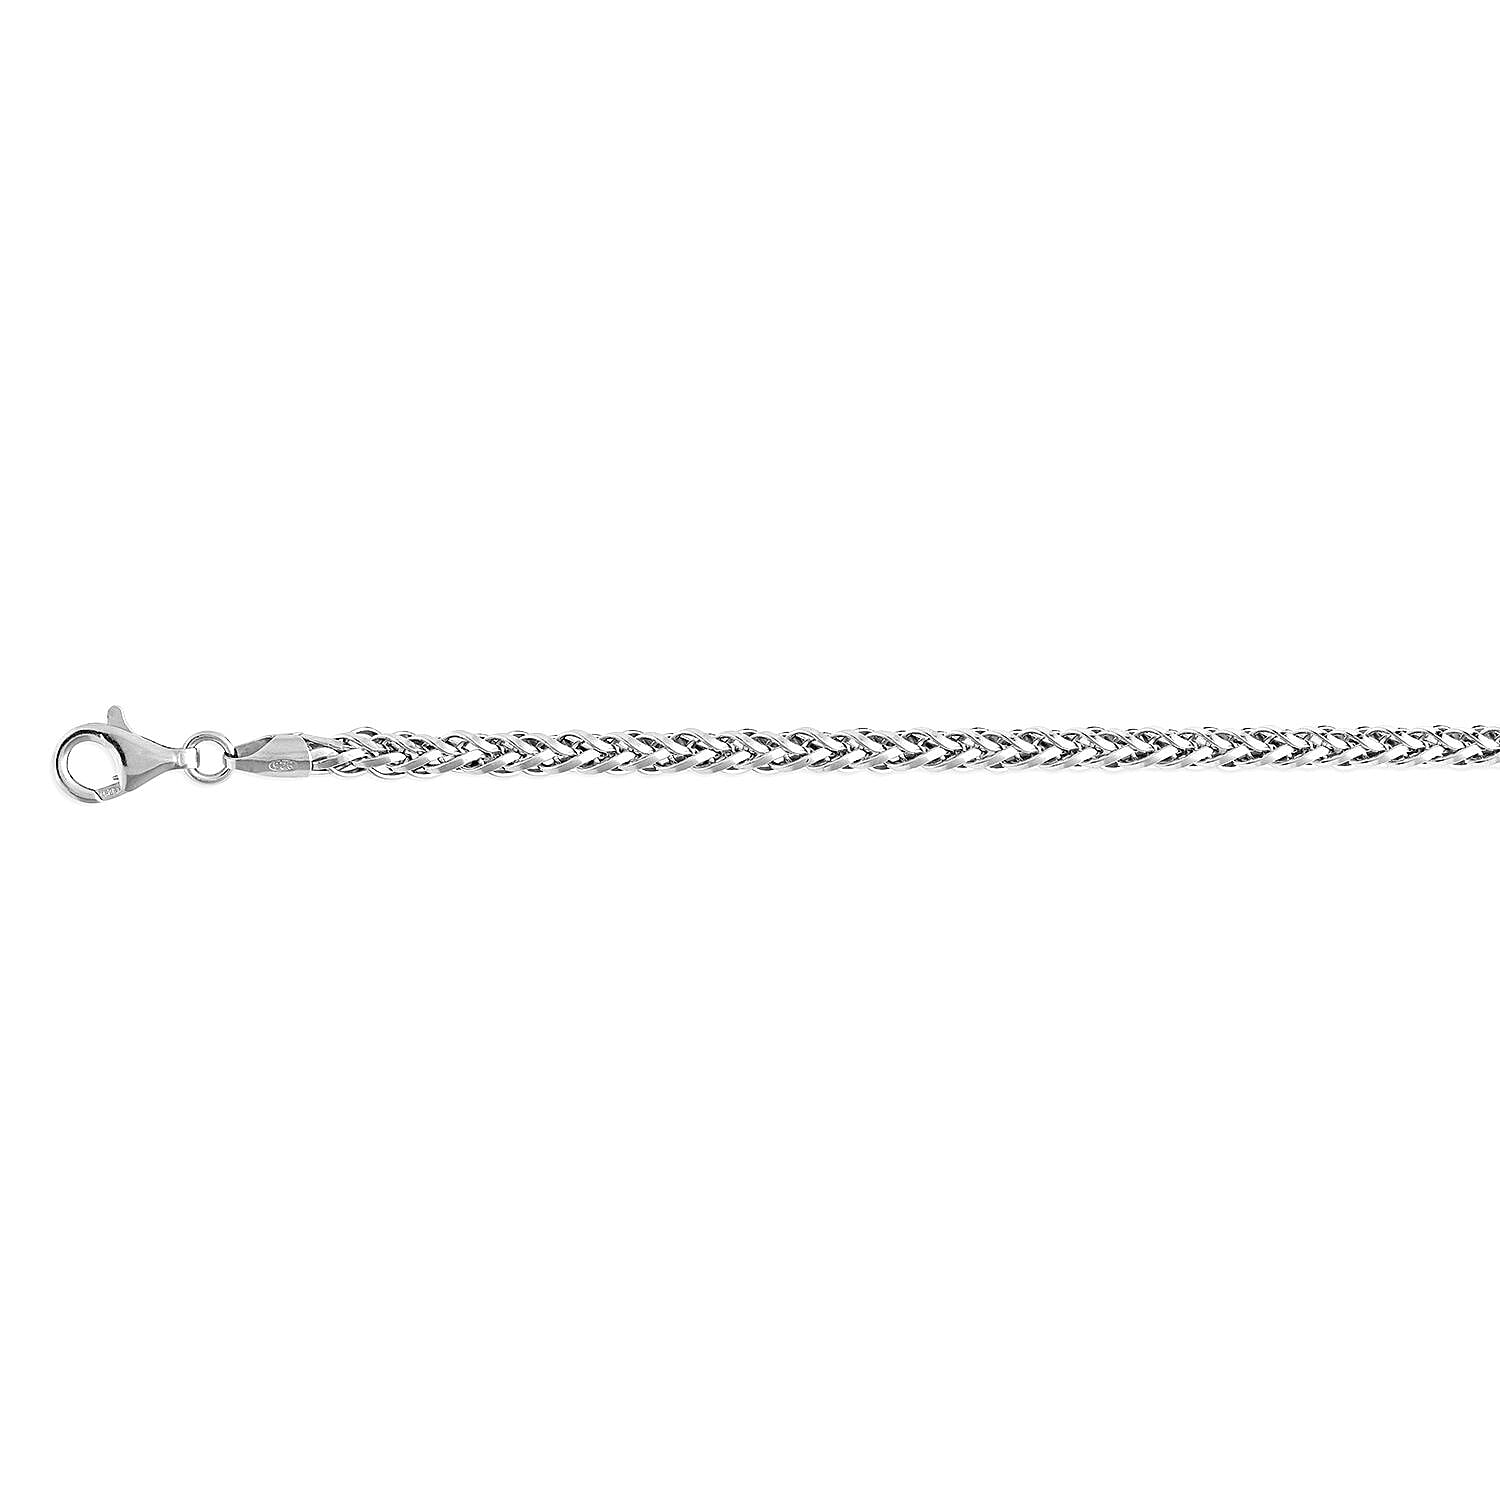 Vicenza Closeout-Sterling Silver Solid Spiga Necklace (Size - 24),Silver Wt. 34.9 Gms